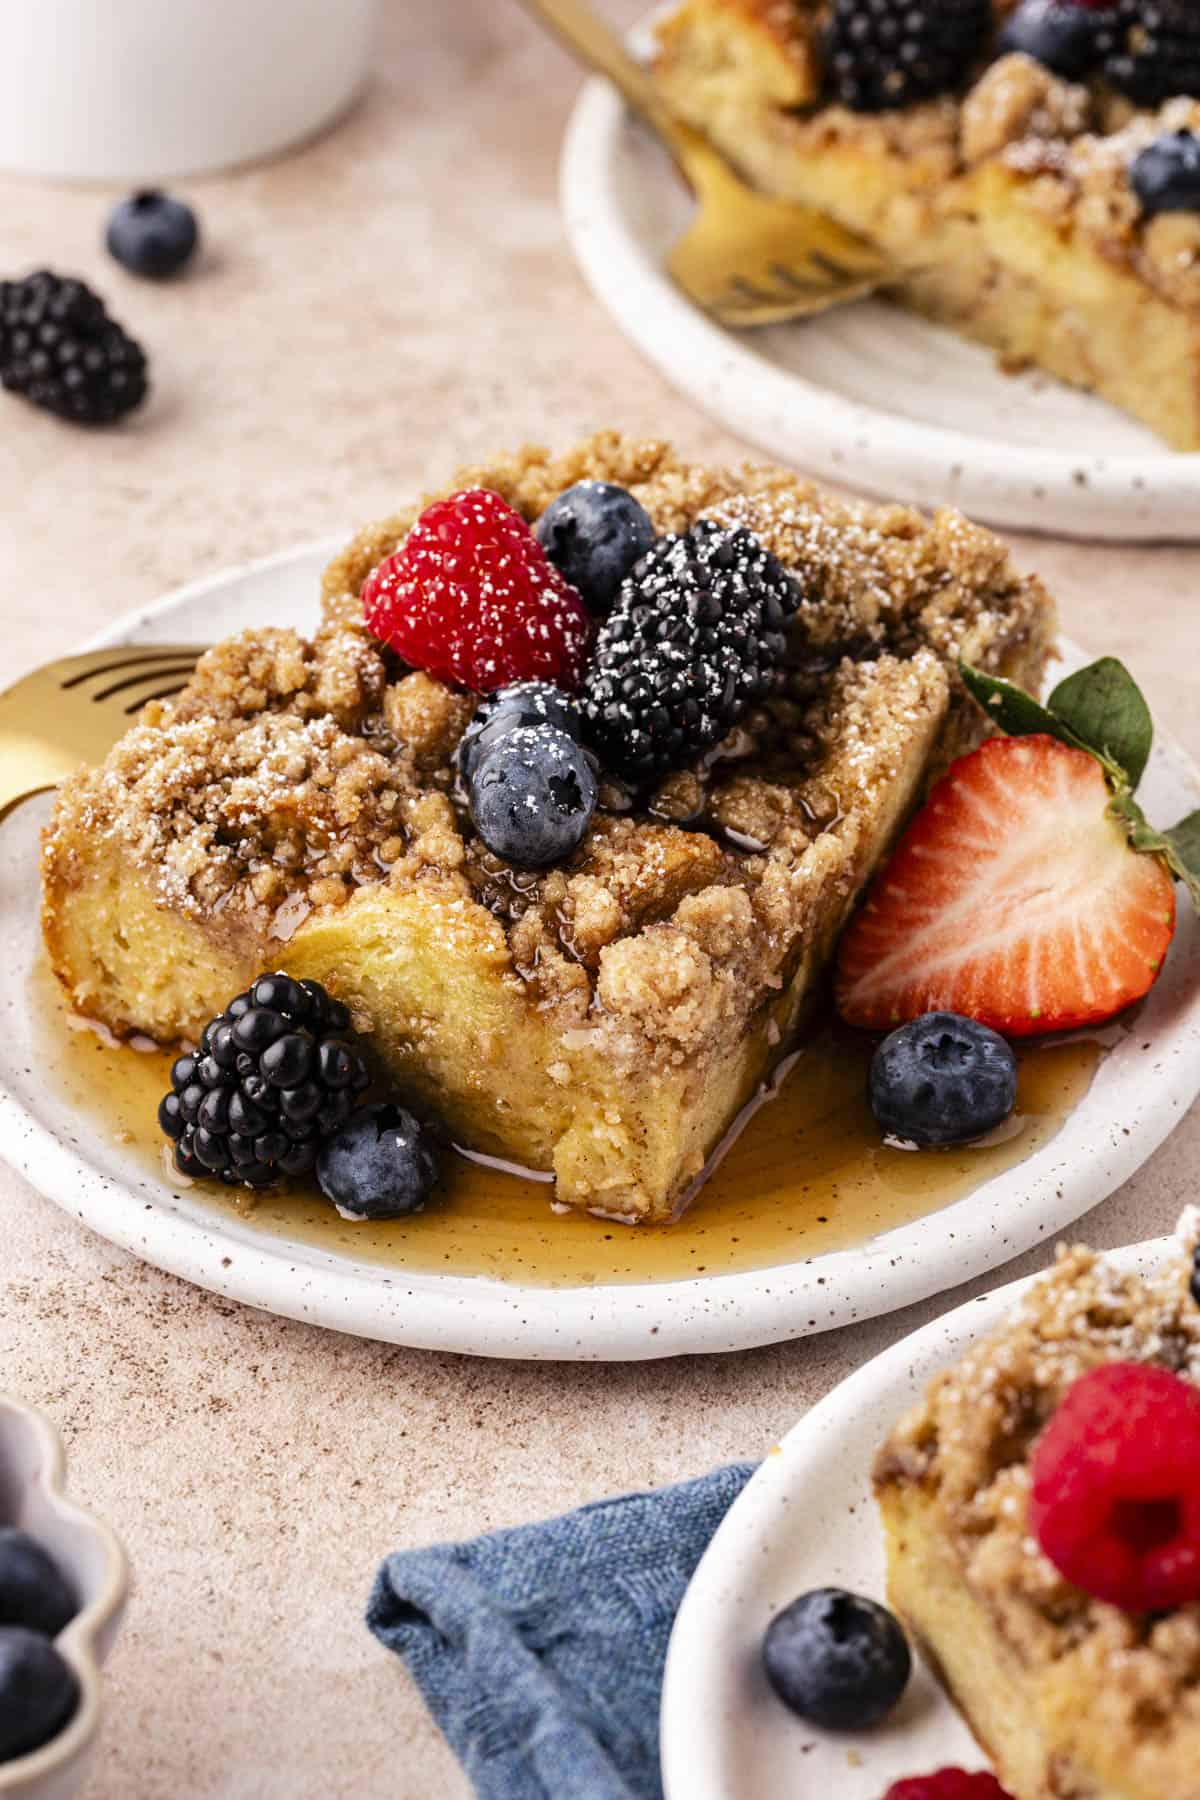 three small plates with slices of french toast casserole on them topped with maple syrup, fresh berries, and a light dusting of powdered sugar